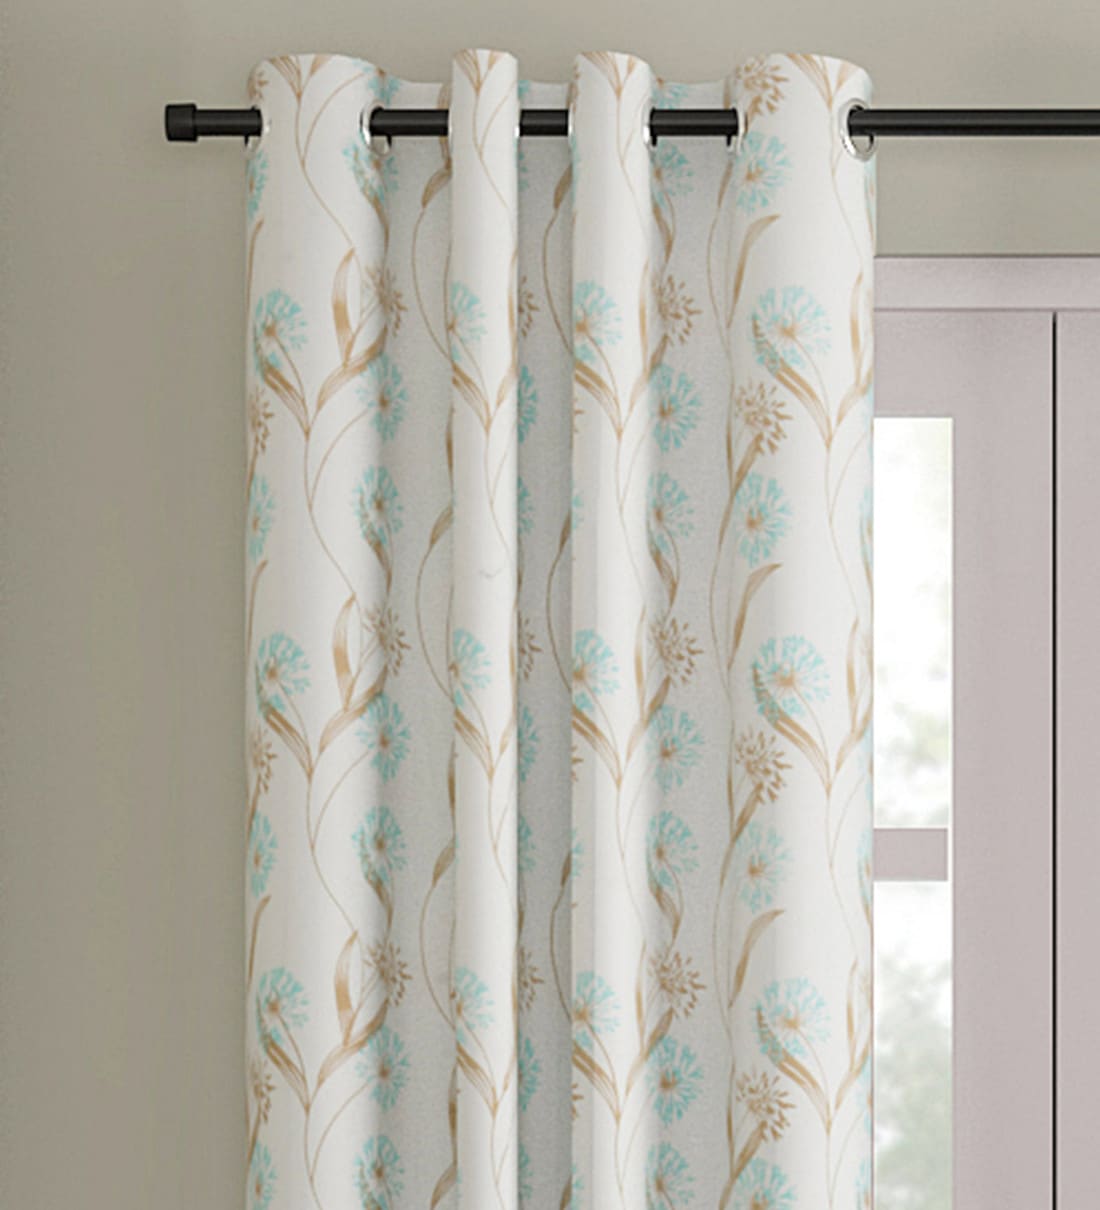 Groomet and Eyelet Curtain